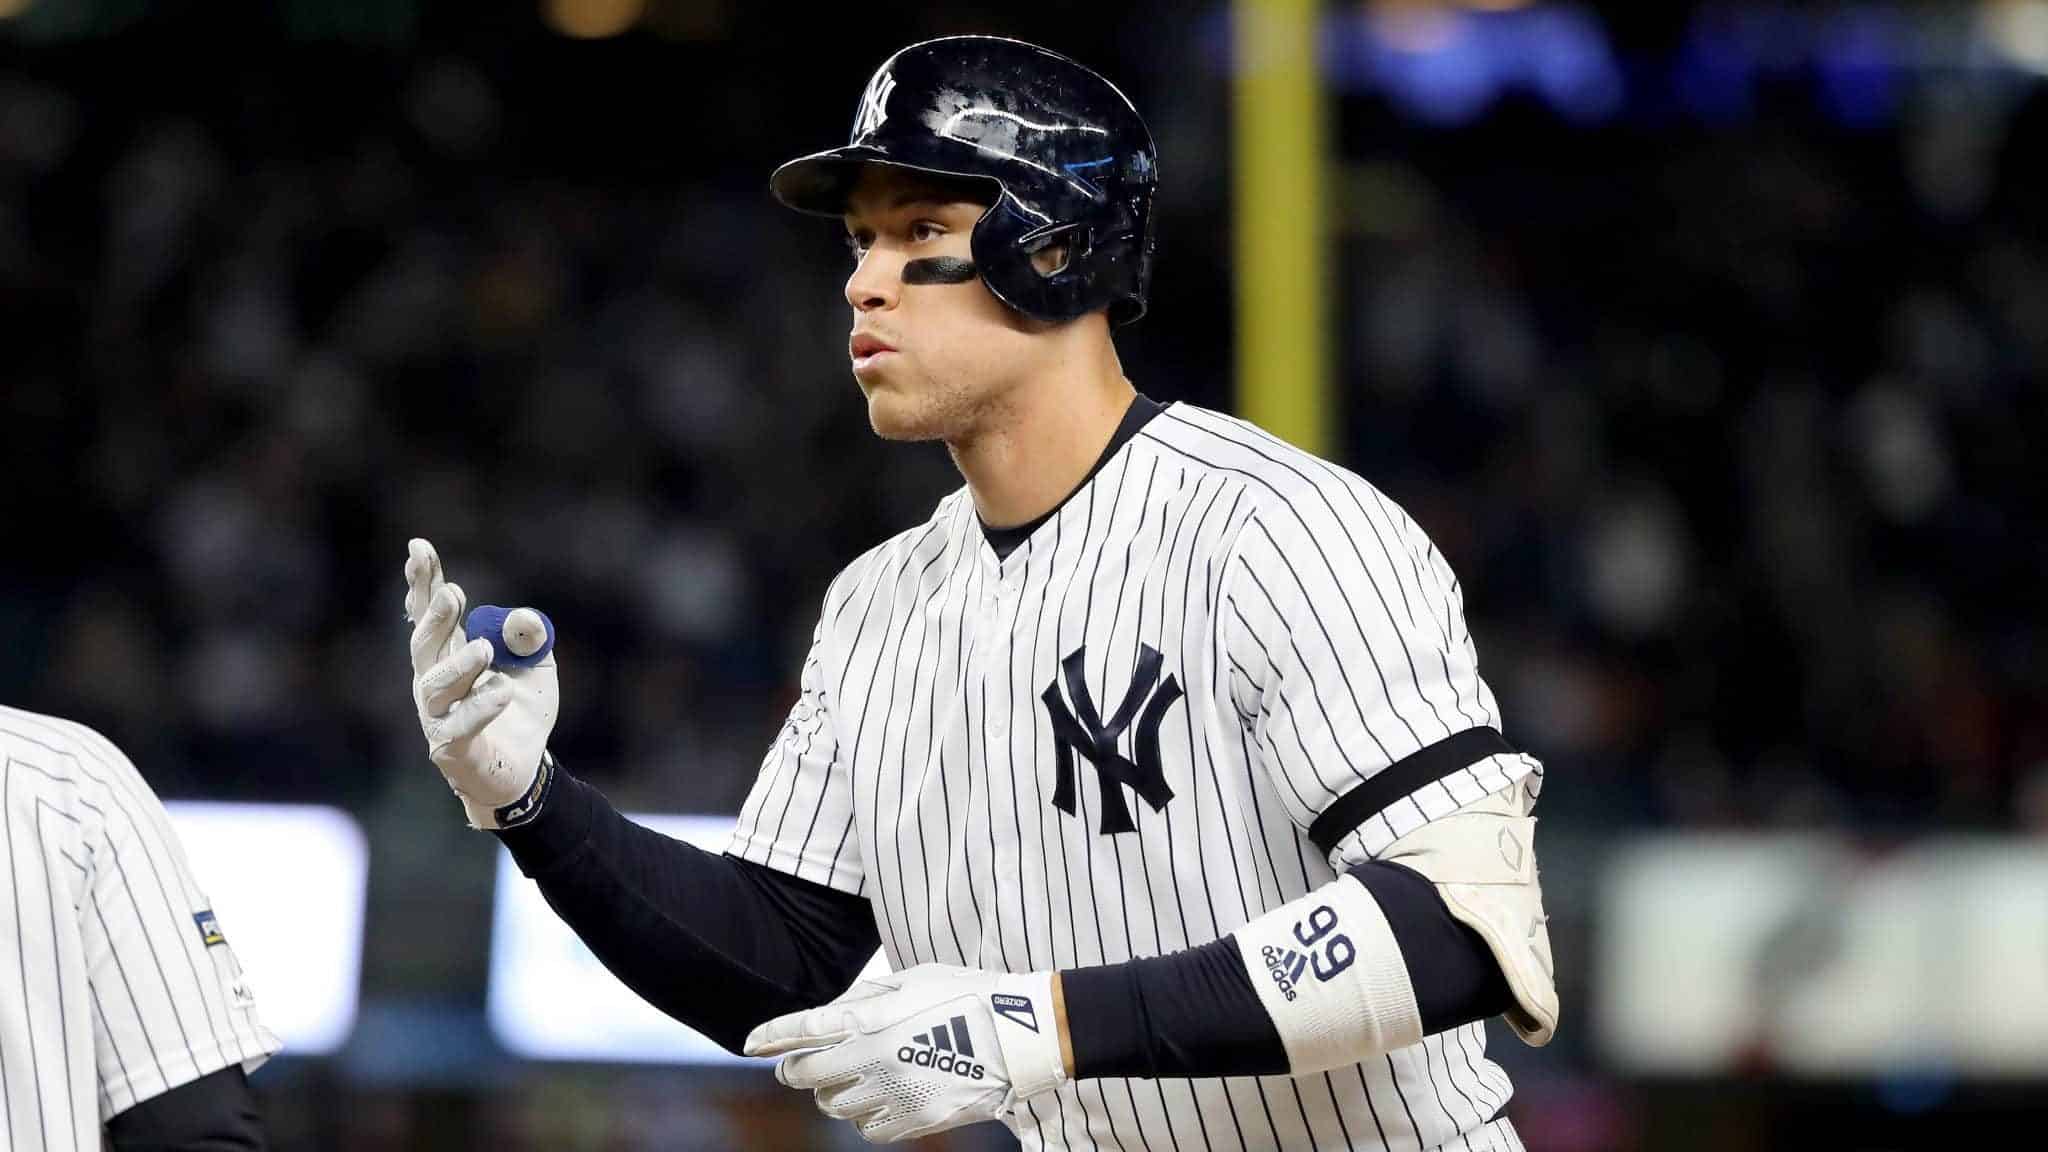 NEW YORK, NEW YORK - OCTOBER 18: Aaron Judge #99 of the New York Yankees celebrates after hitting a single against Justin Verlander #35 of the Houston Astros during the first inning in game five of the American League Championship Series at Yankee Stadium on October 18, 2019 in New York City.